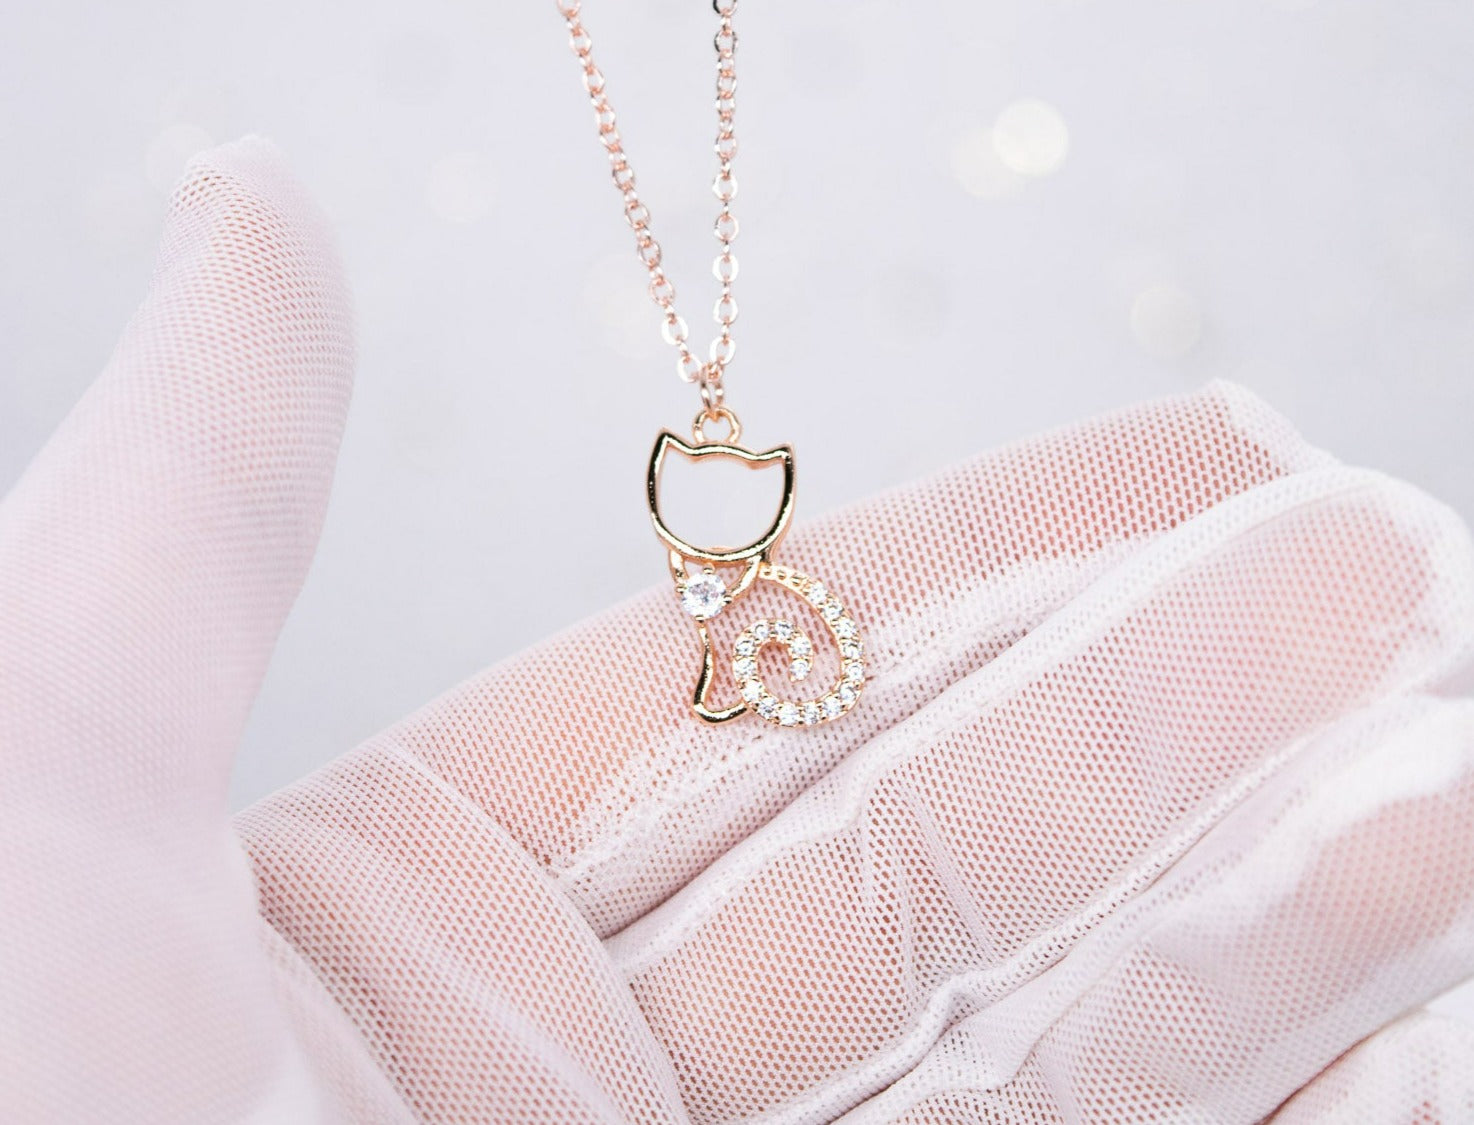 Luxe Kitten ~ Discreet Rose Gold Ownership Necklace